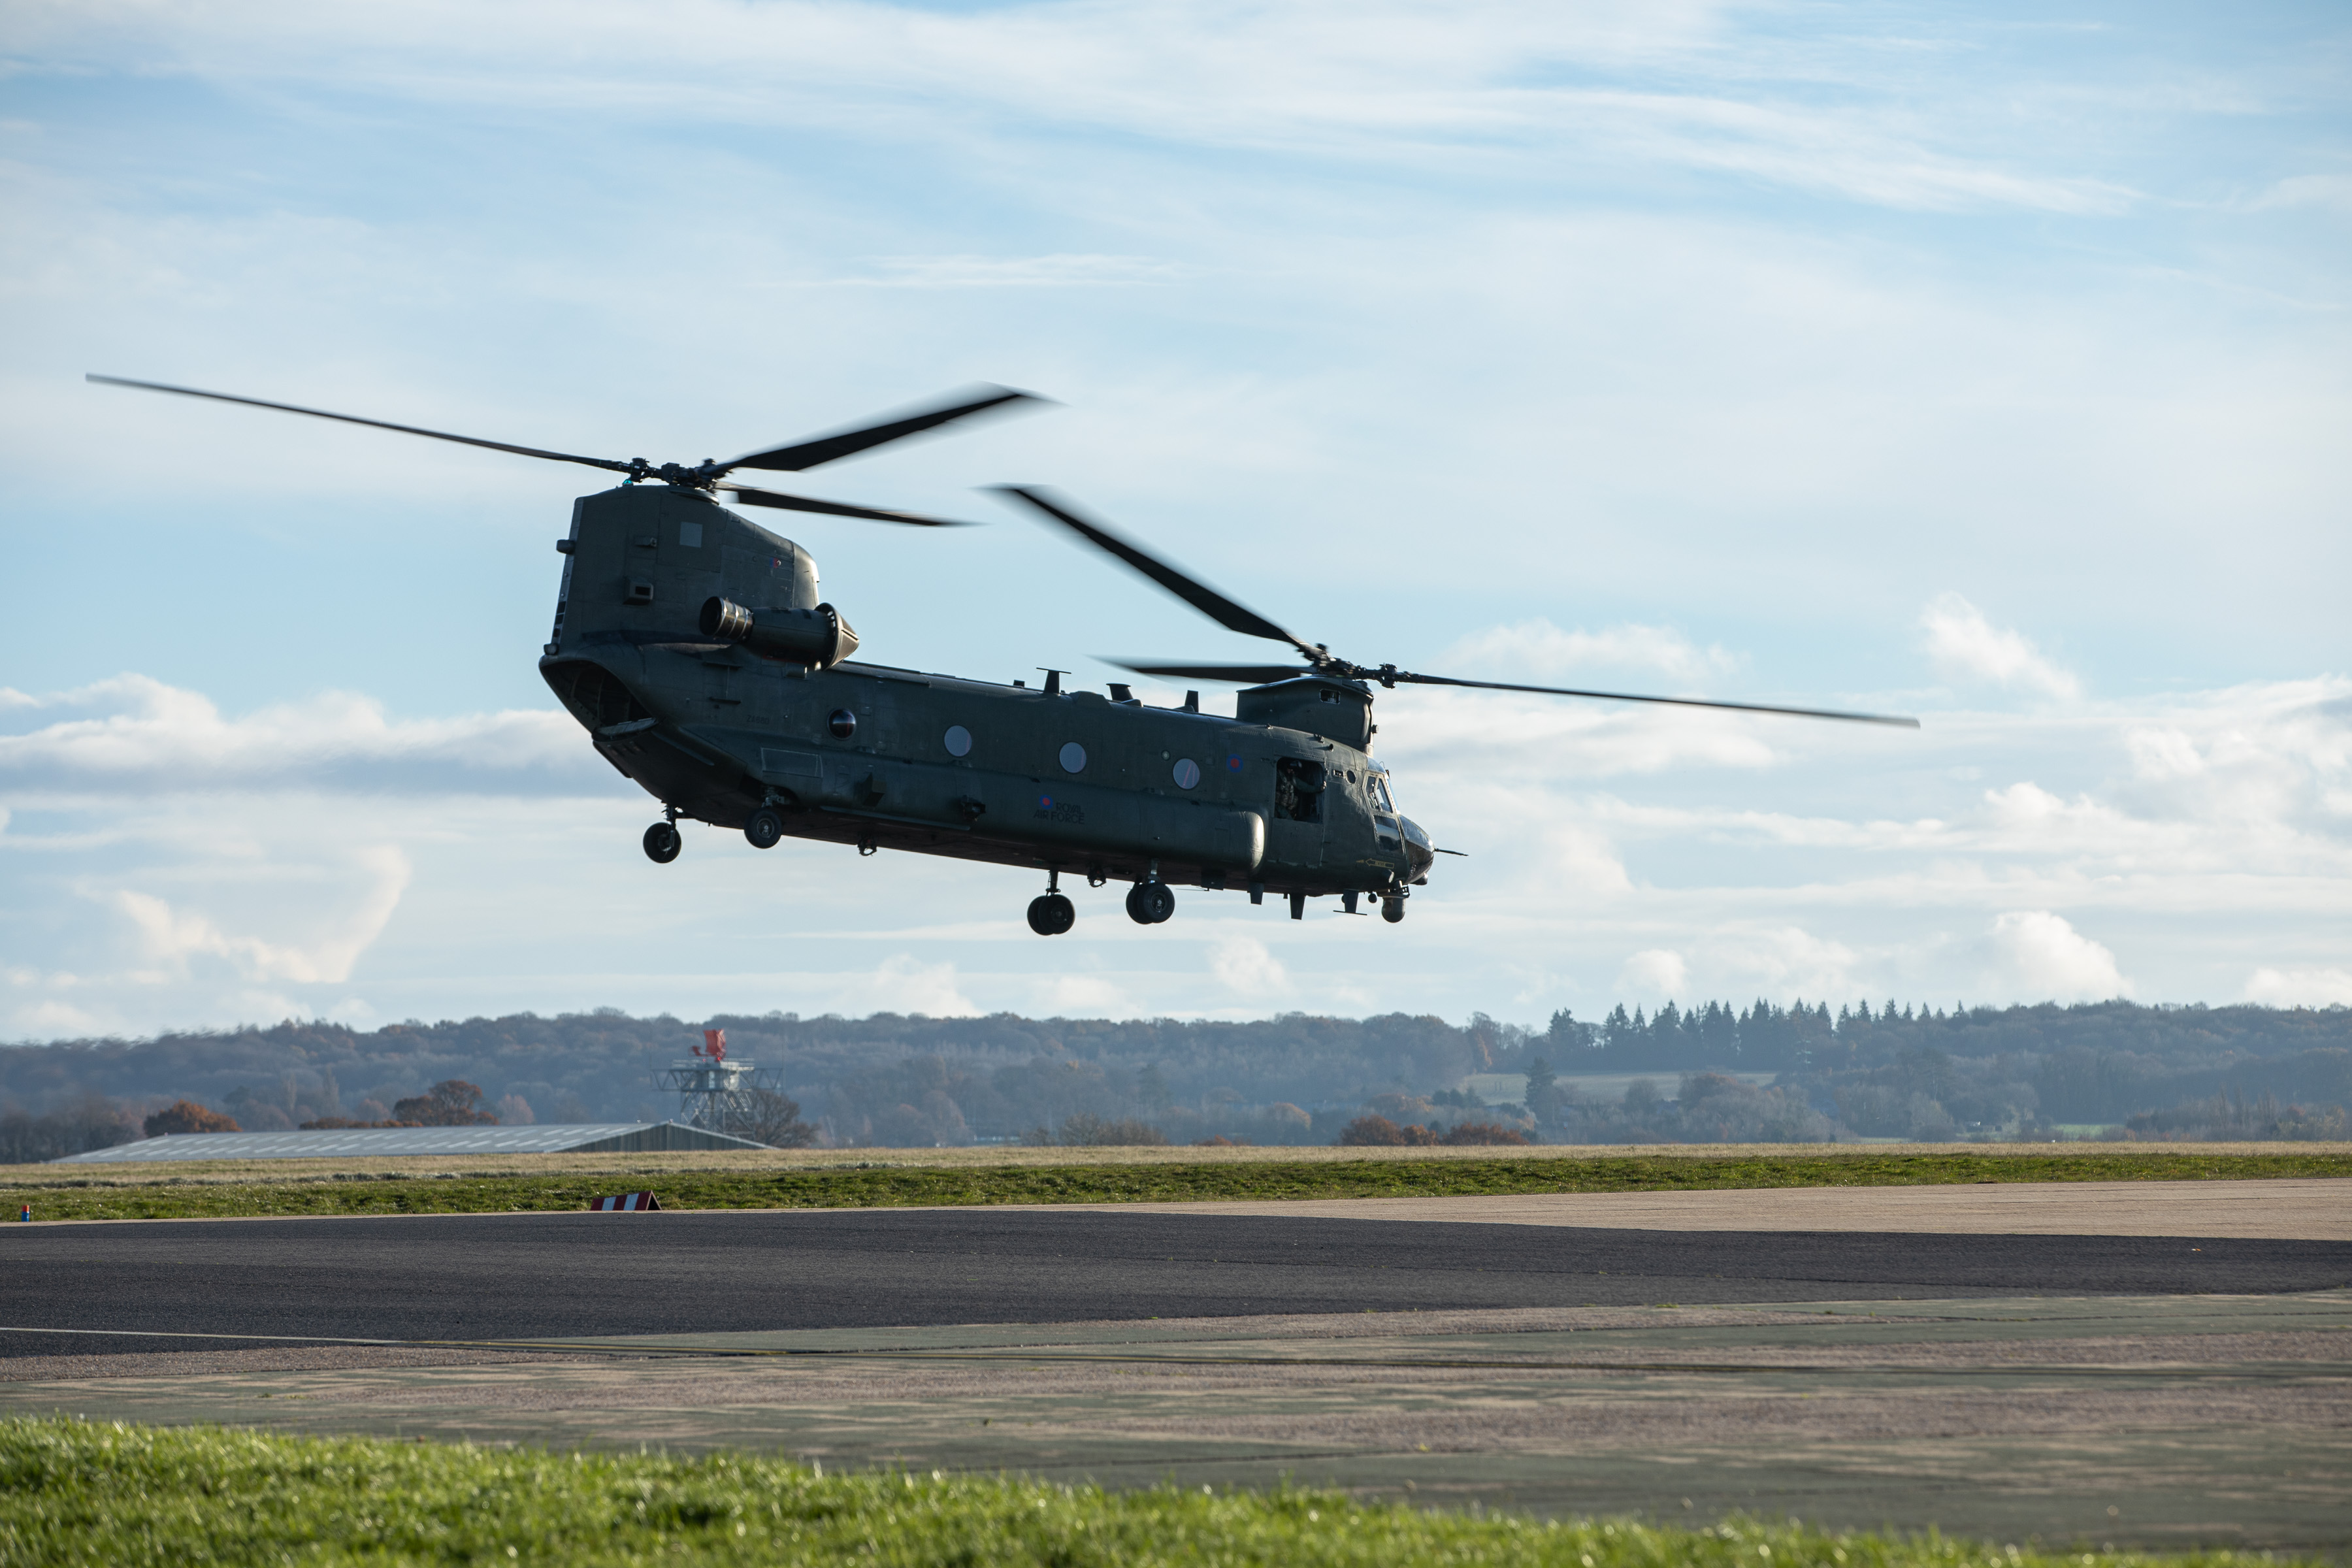 Image shows RAF Chinook helicopter flying low over the airfield.